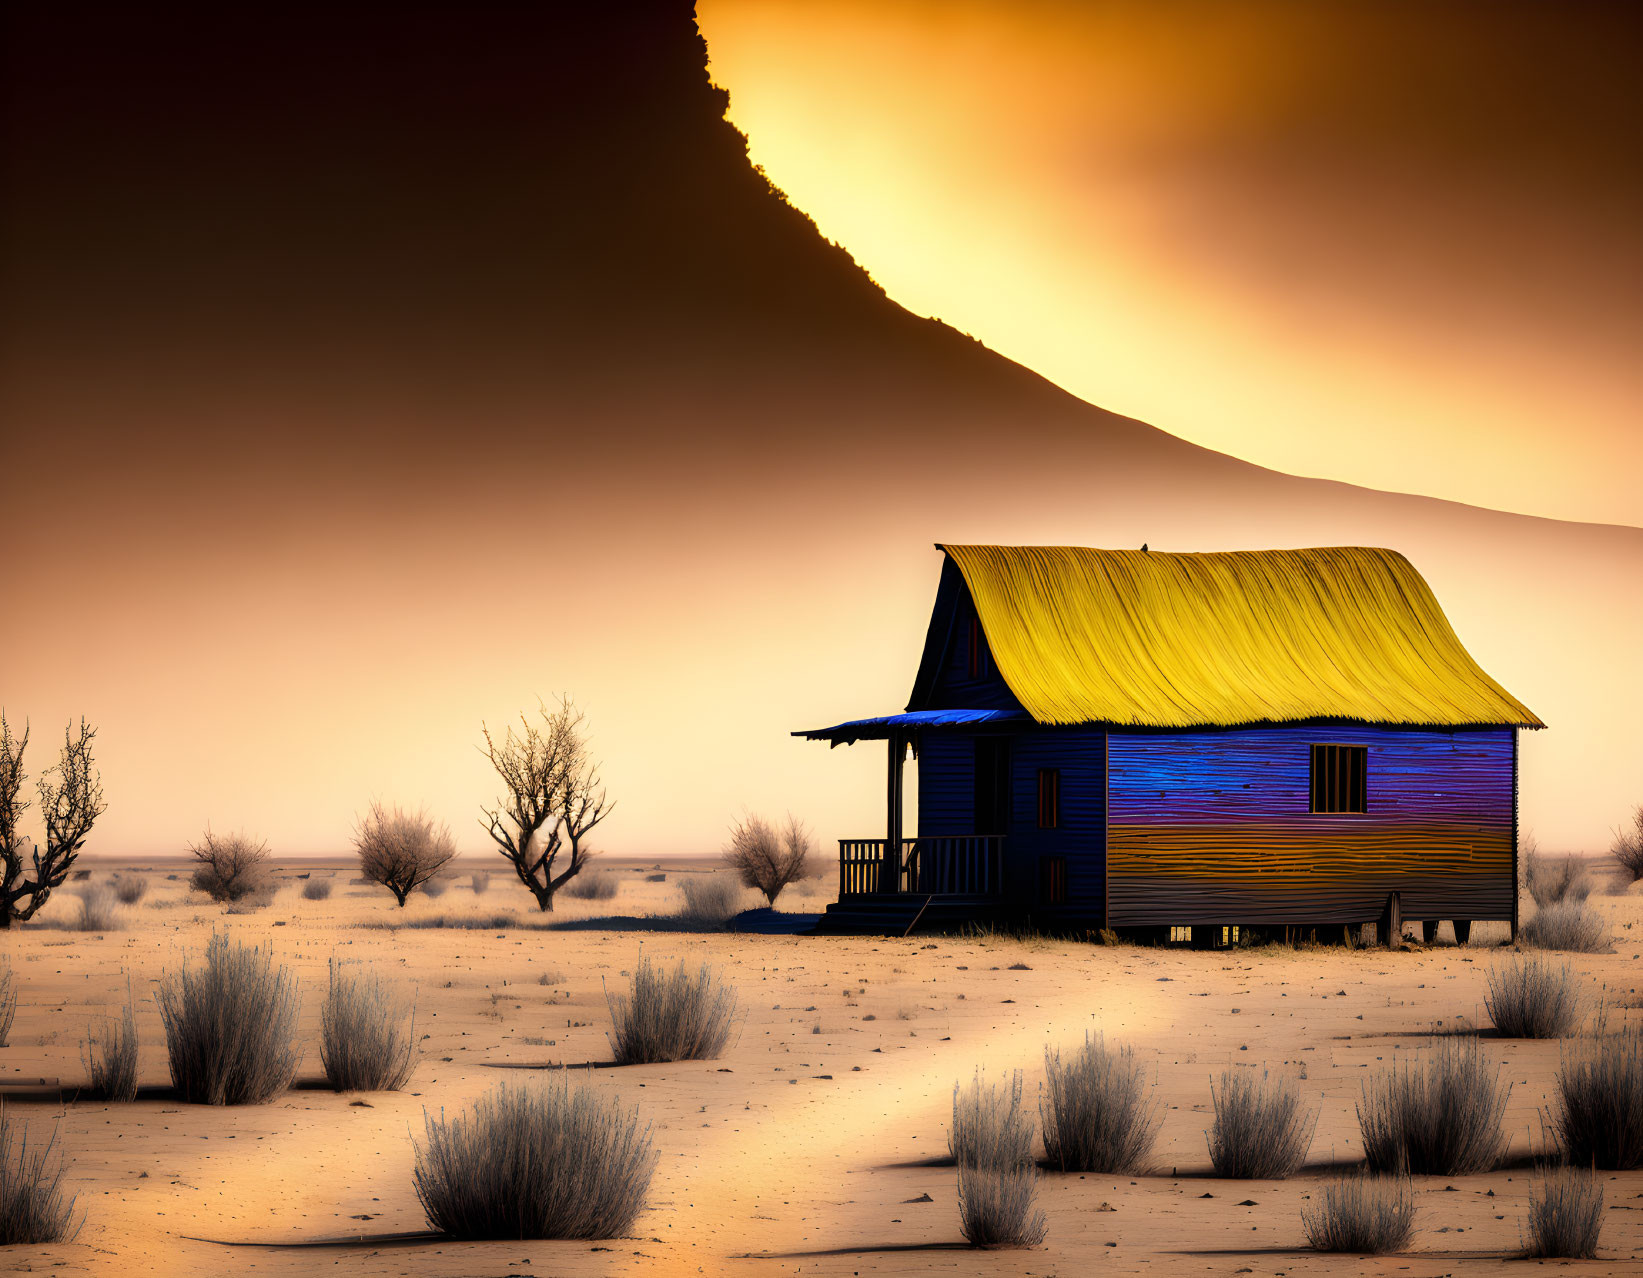 Isolated Vibrant Blue and Yellow House in Desert Landscape